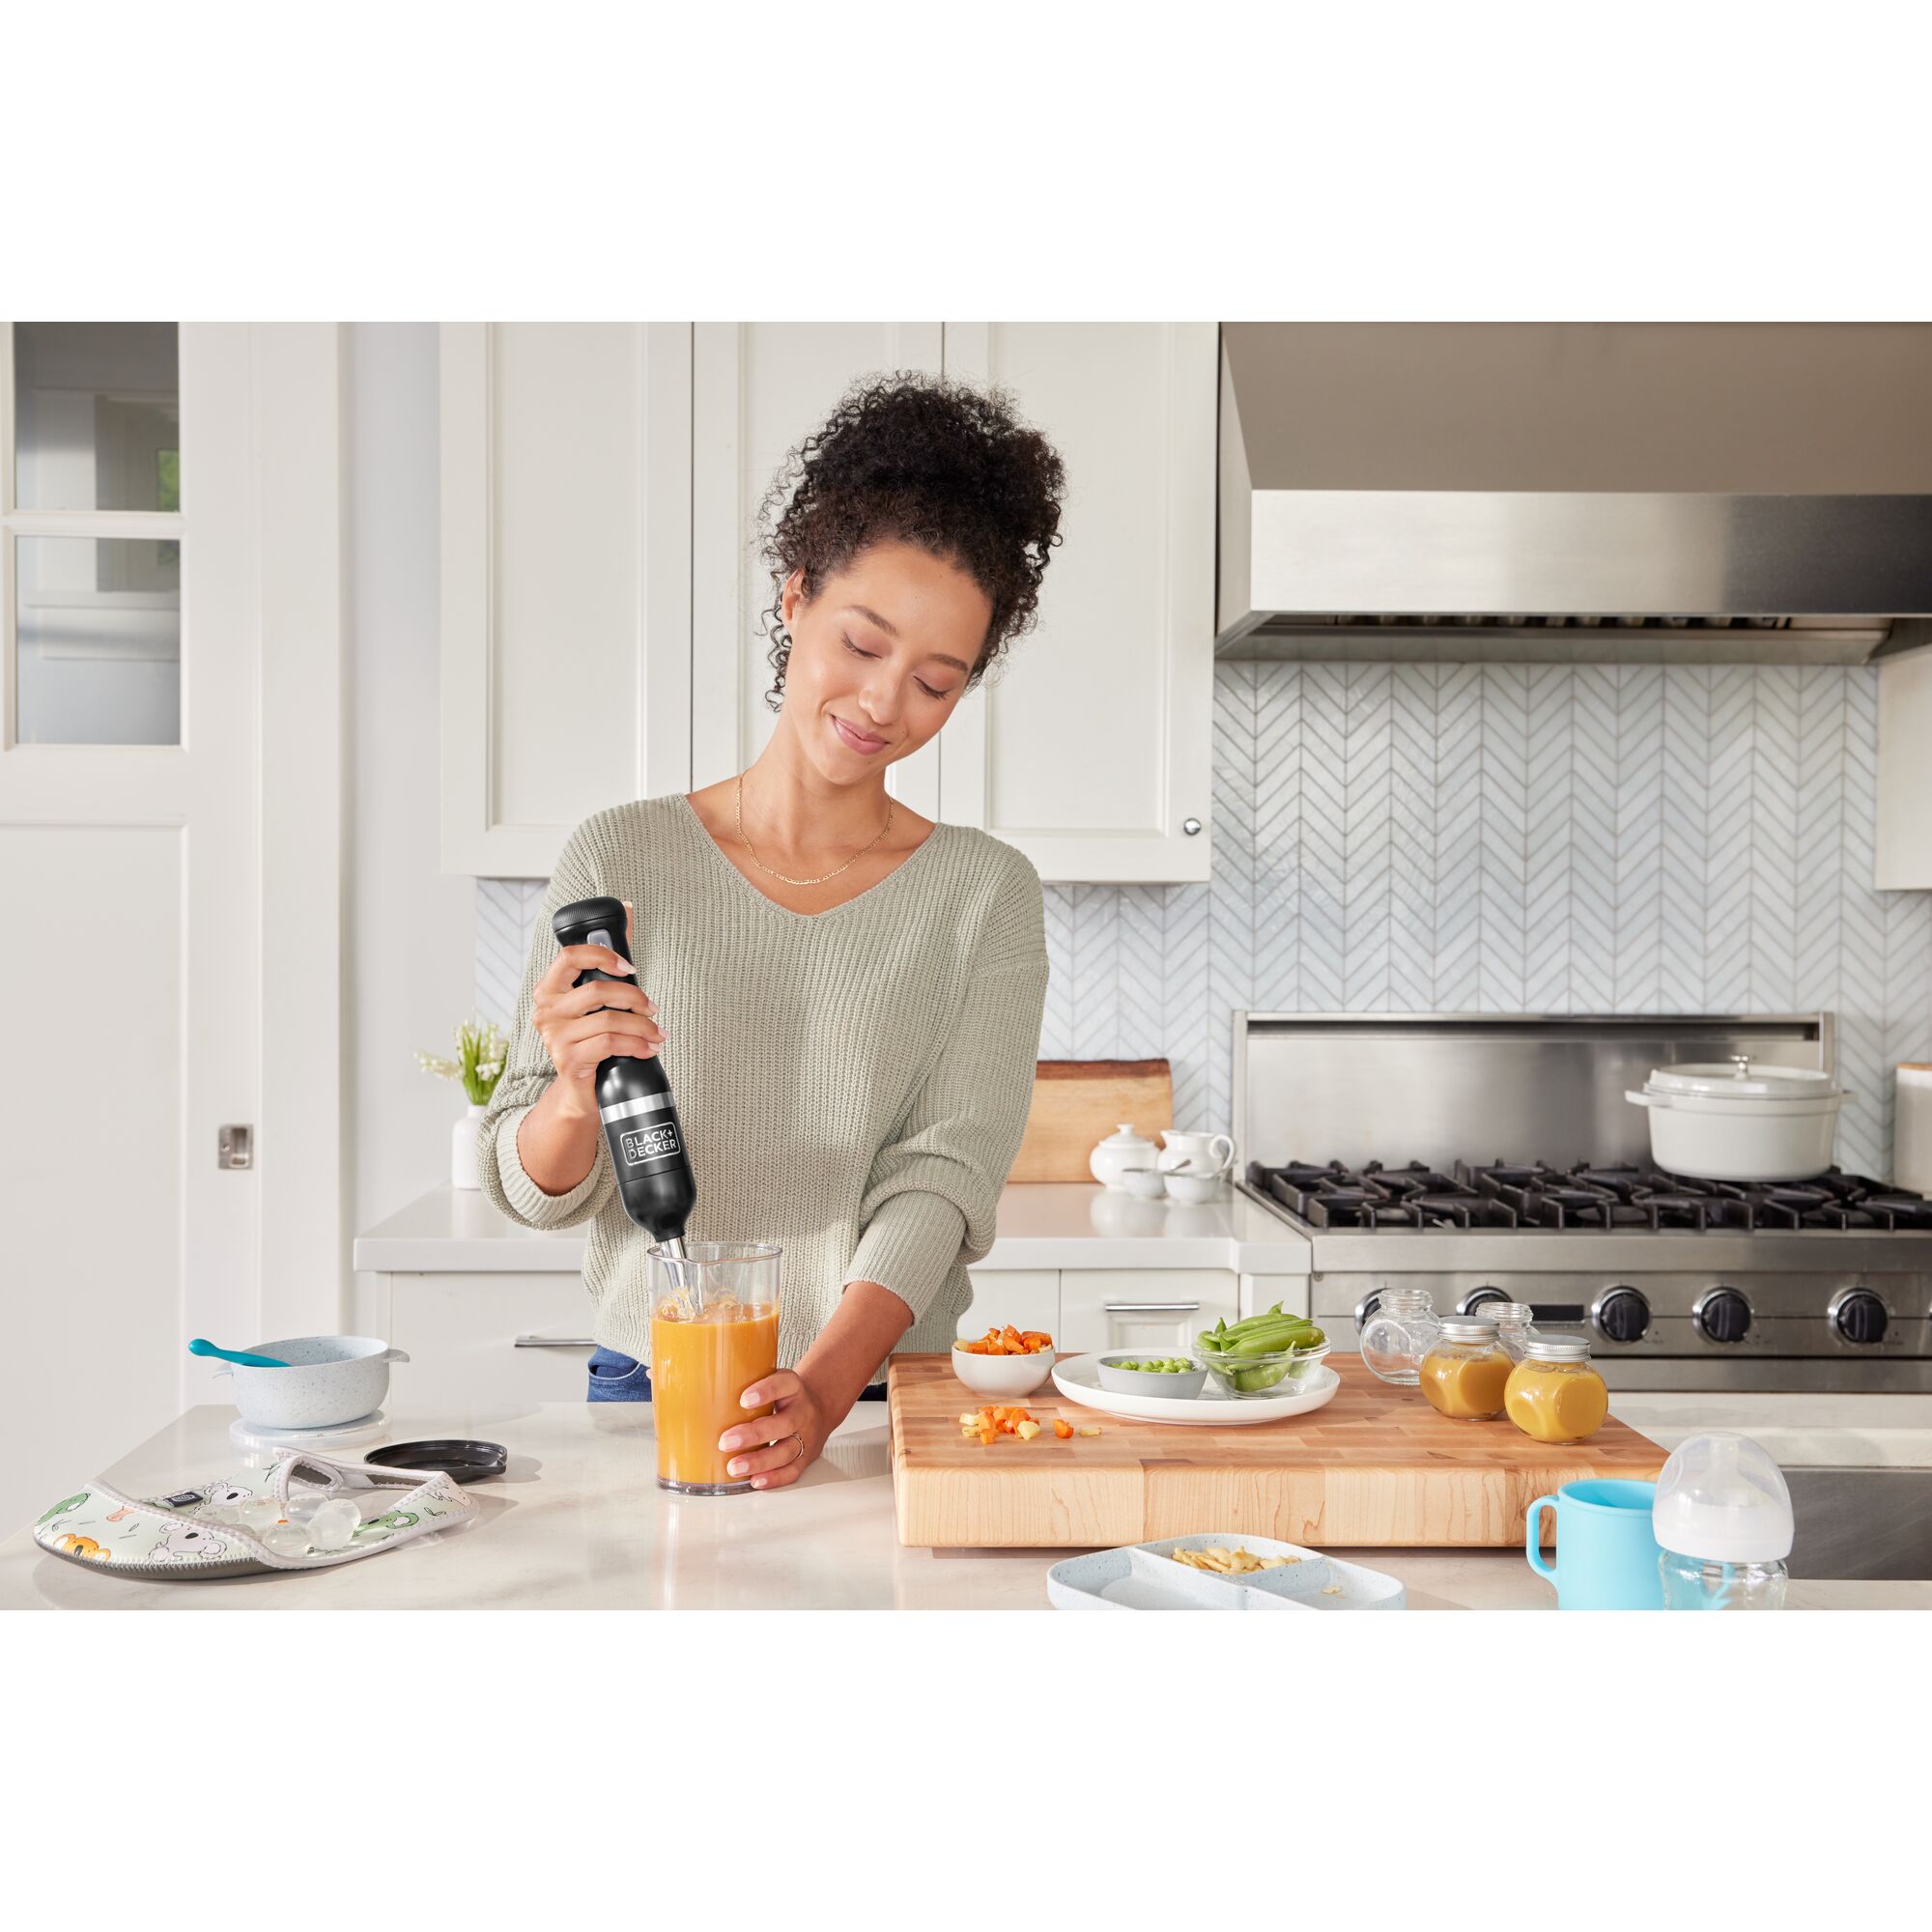 Talent using the black, BLACK+DECKER kitchen wand immersion blender to prepare baby food